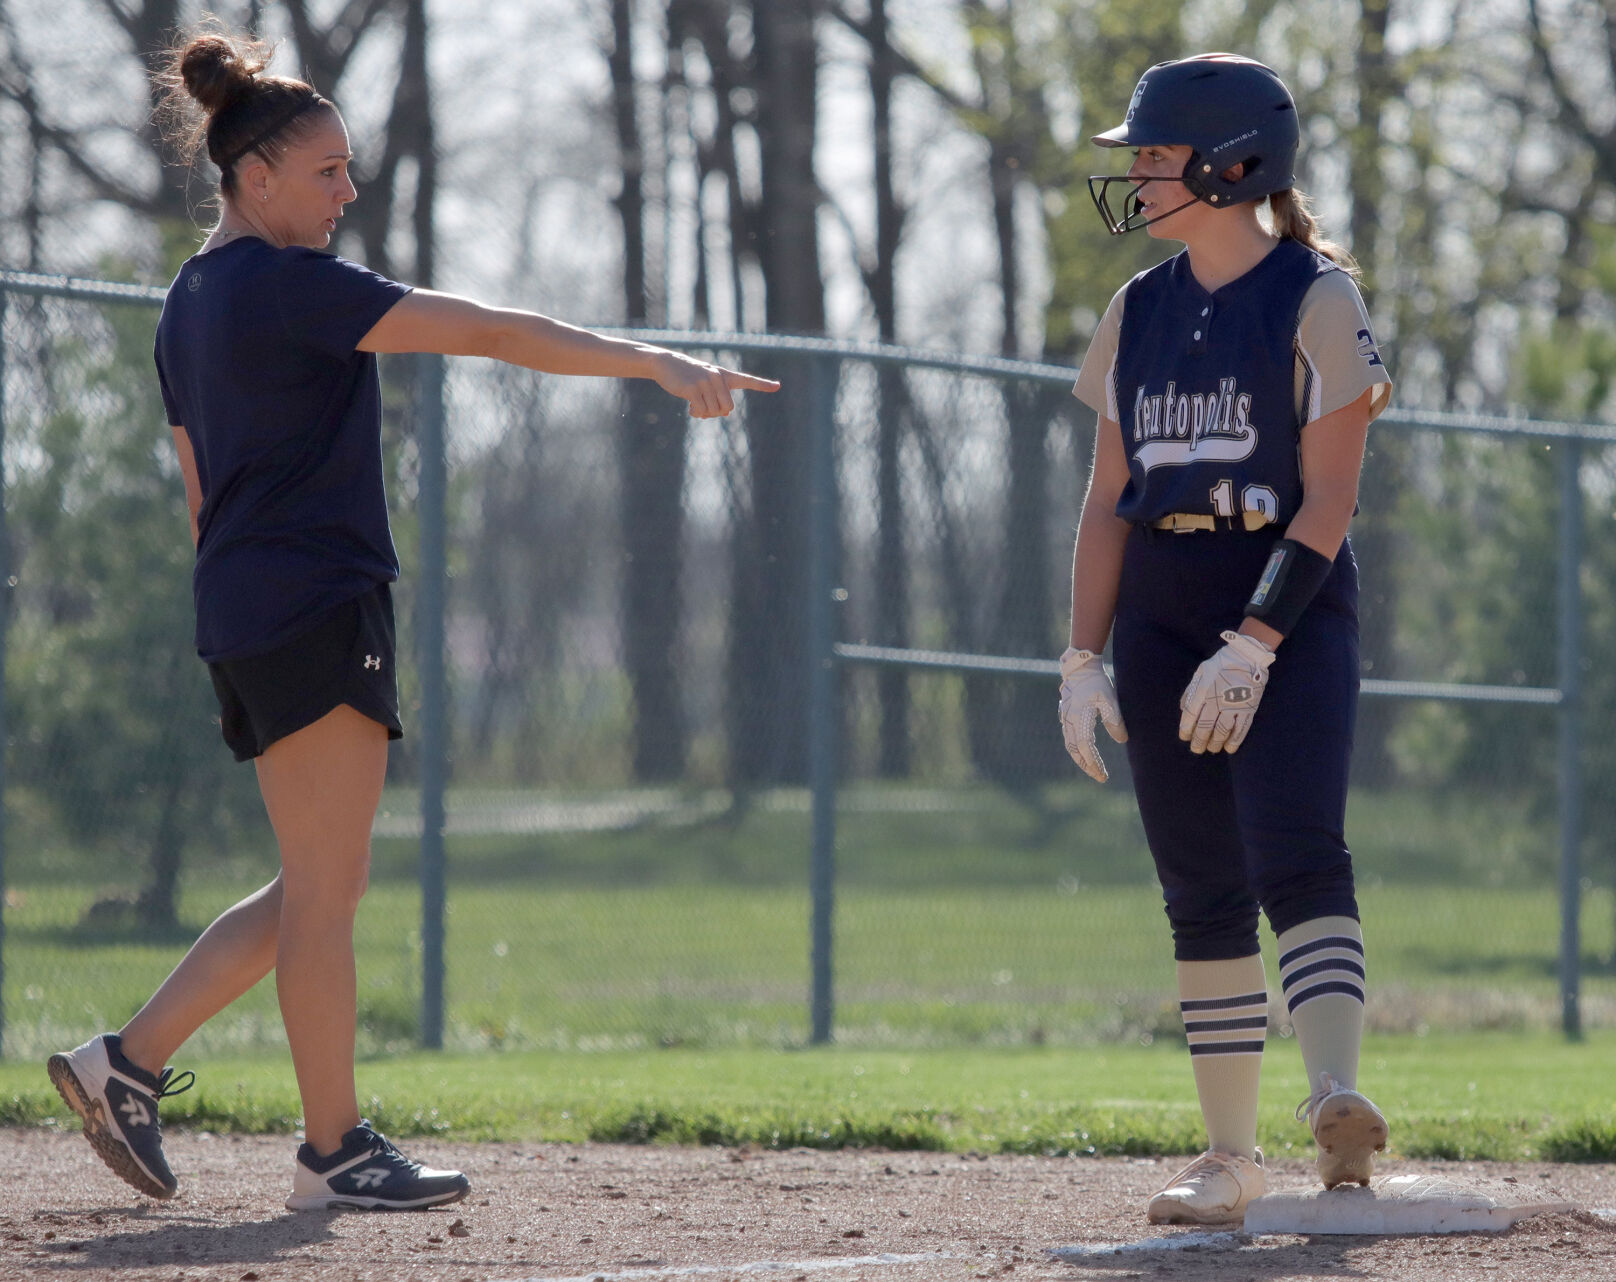 Teutopolis Softball Shines with Multiple Players Recording Hits in 14-0 Victory, St. Anthony Baseball Prevails Over Mahomet-Seymour